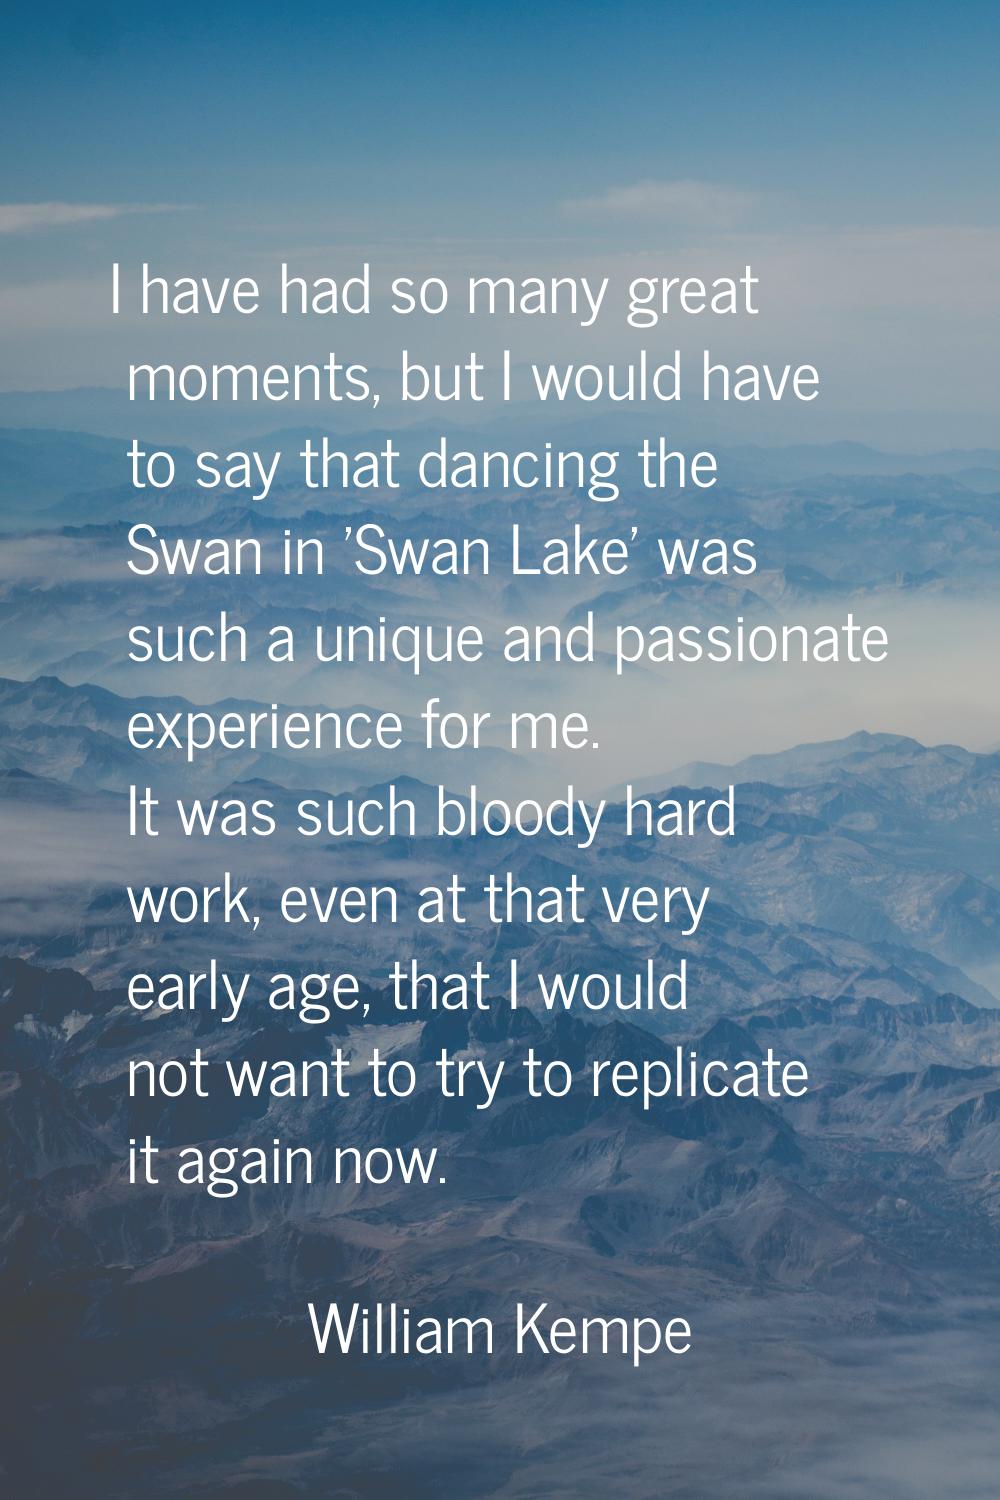 I have had so many great moments, but I would have to say that dancing the Swan in 'Swan Lake' was 